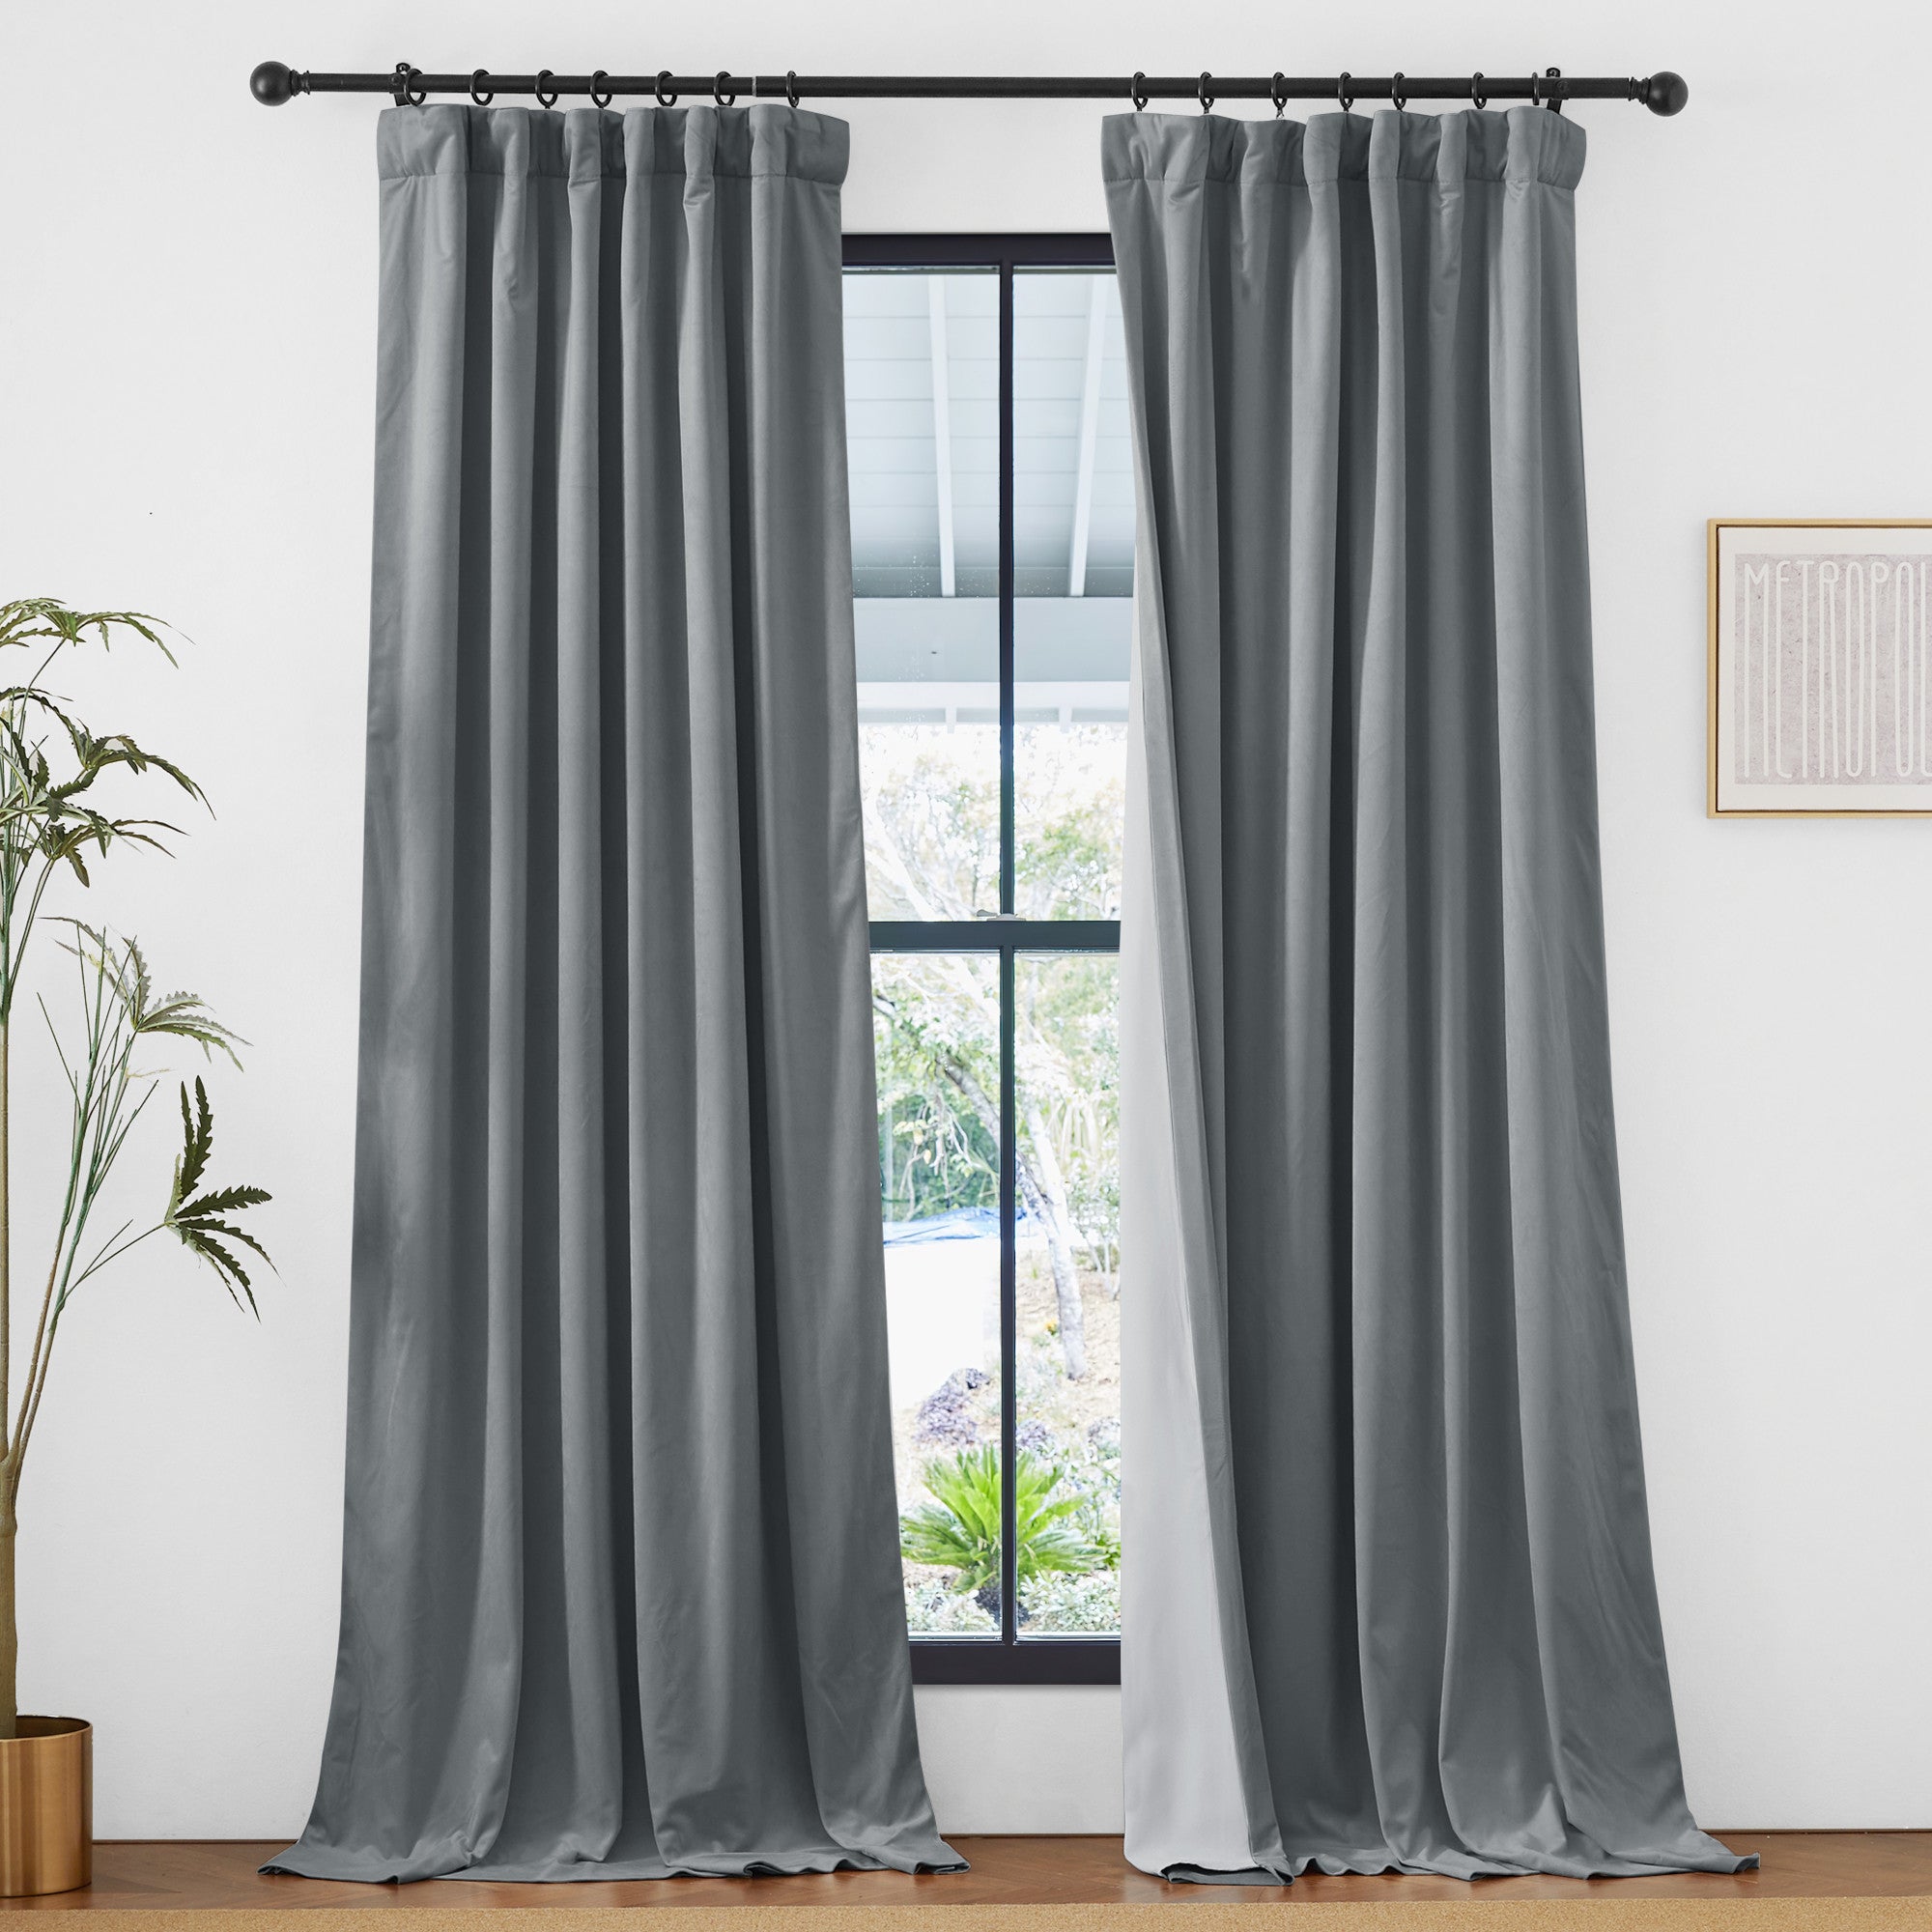 2 Layers Rod Pocket & Back Tab Velvet Thermal Insulated Light Blocking Thick Drapes Curtains, 1 Panels